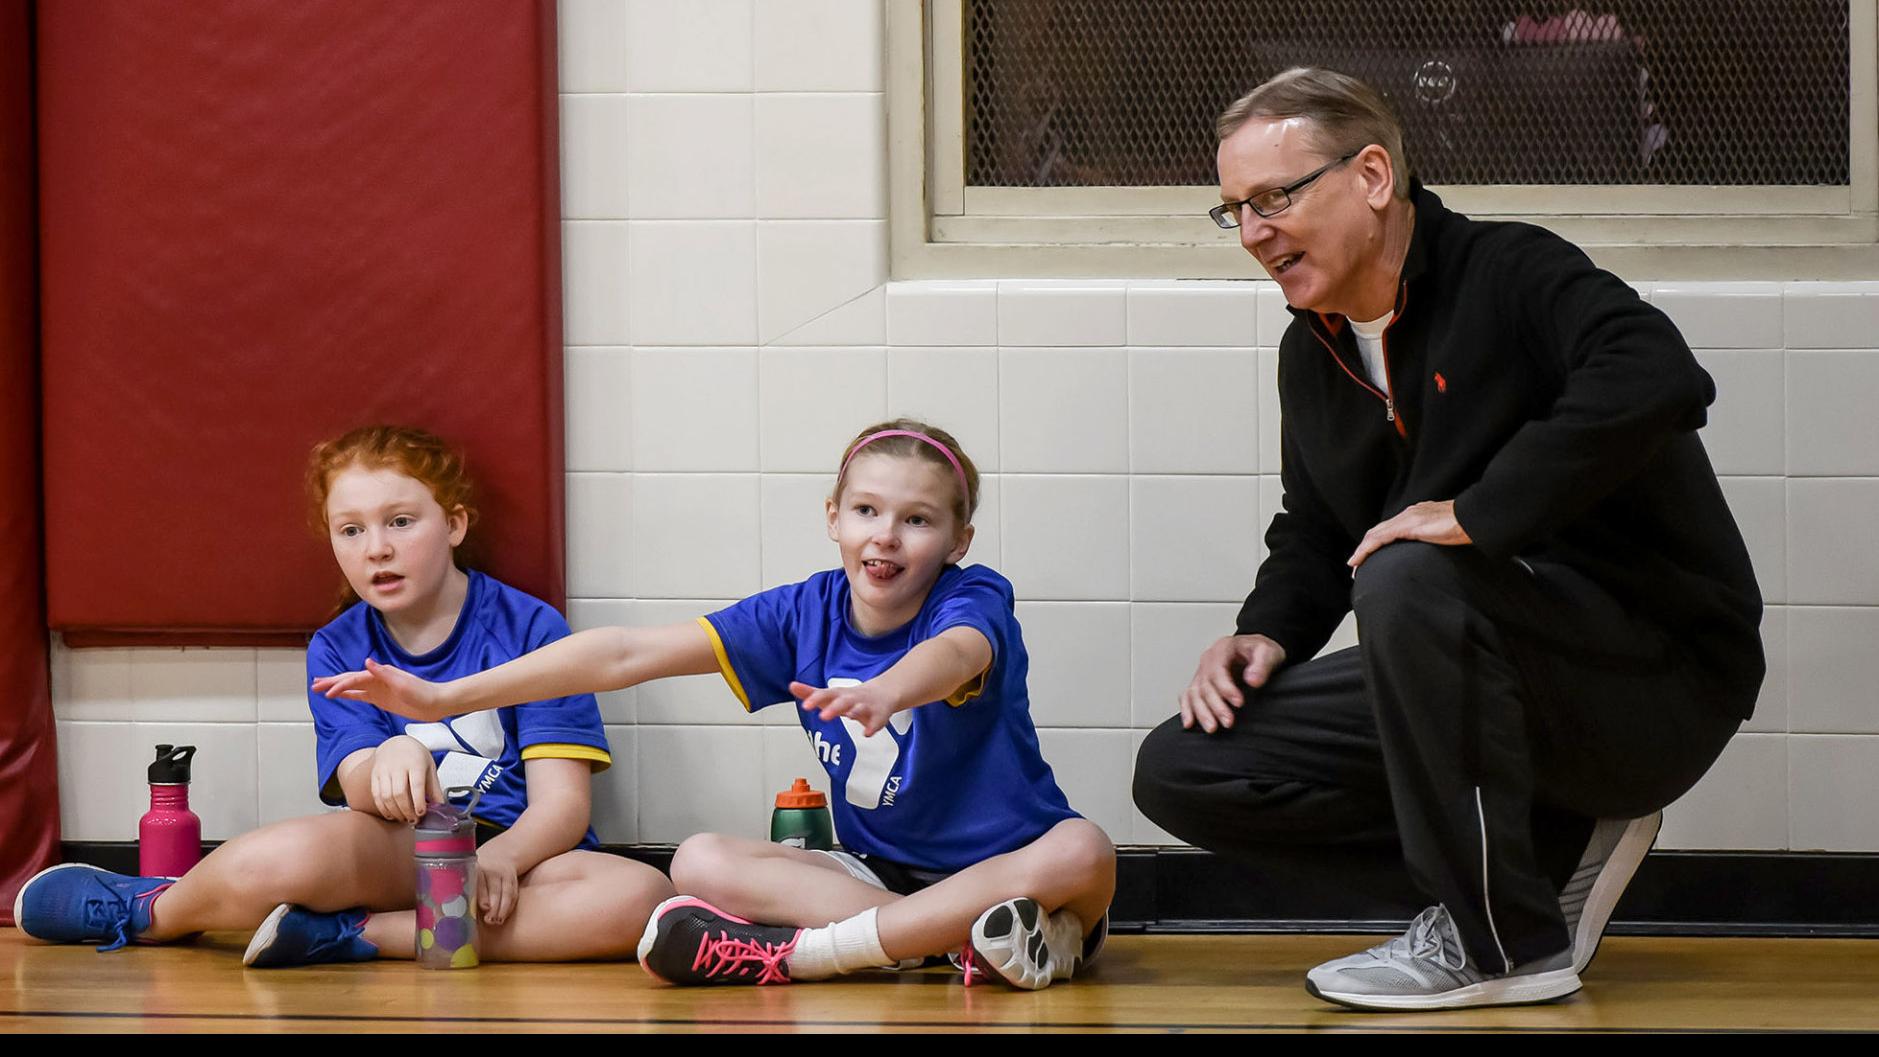 College coach finds rewards in teaching game to shorties | Local News |  